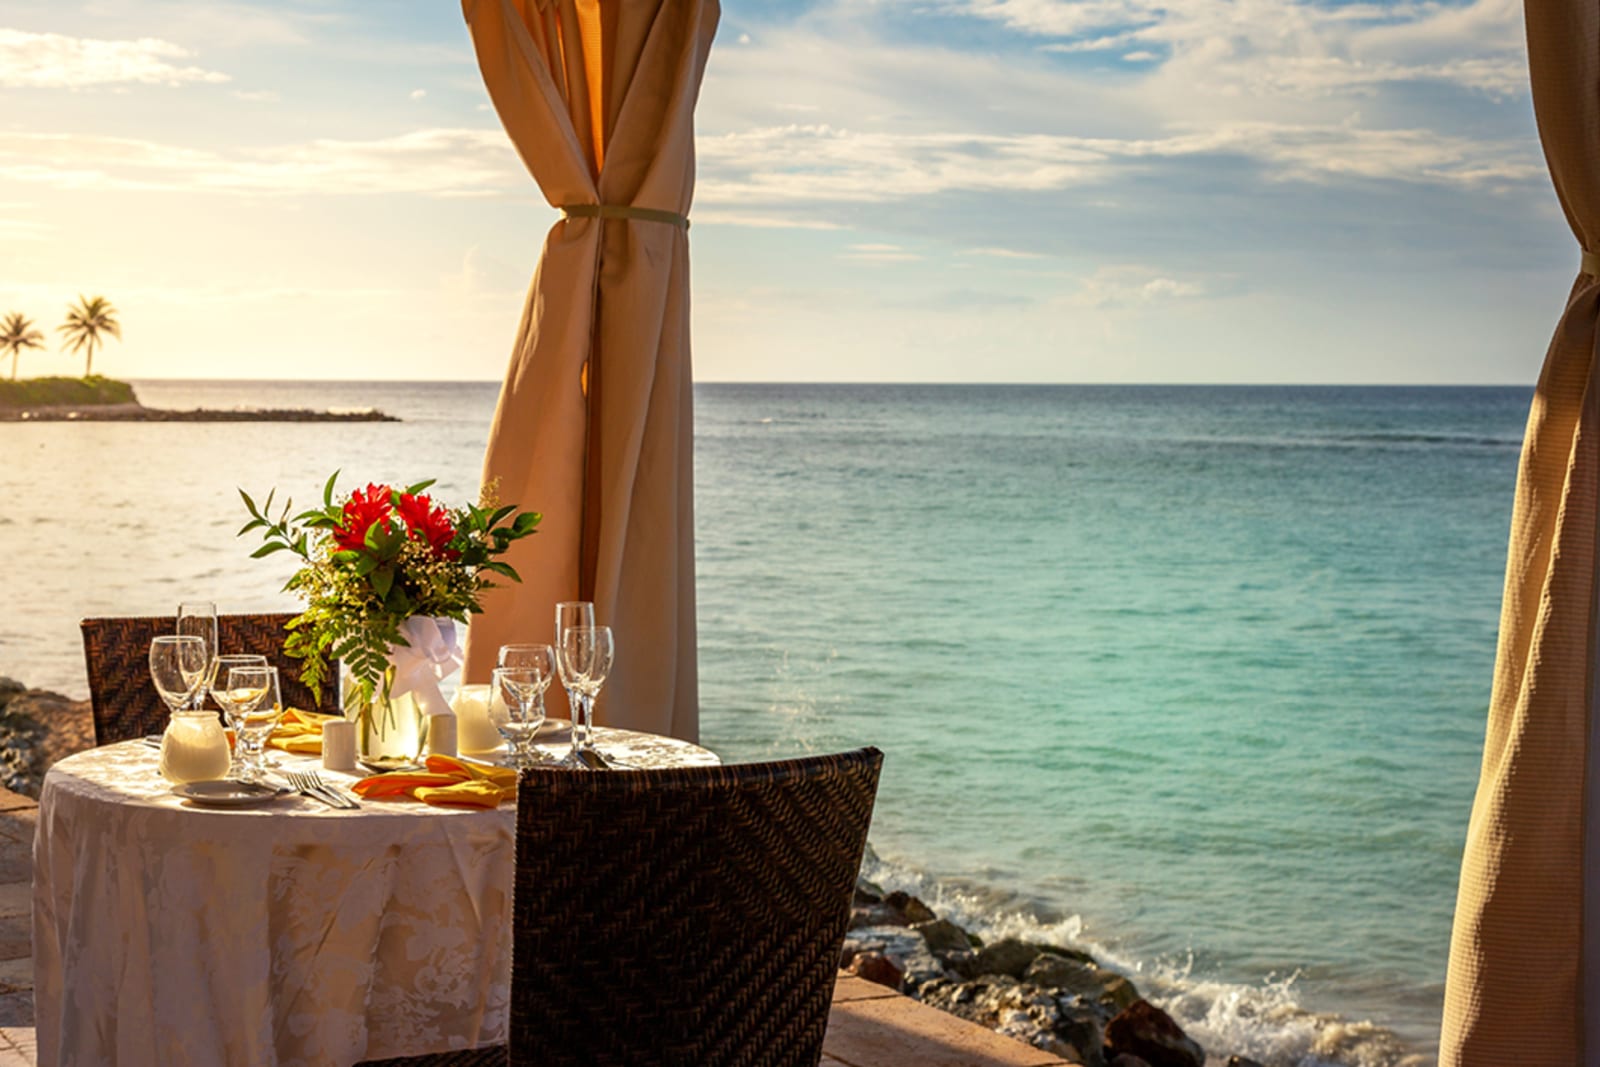 Having dinner on the beach is one of the most romantic things you can do in Punta Cana